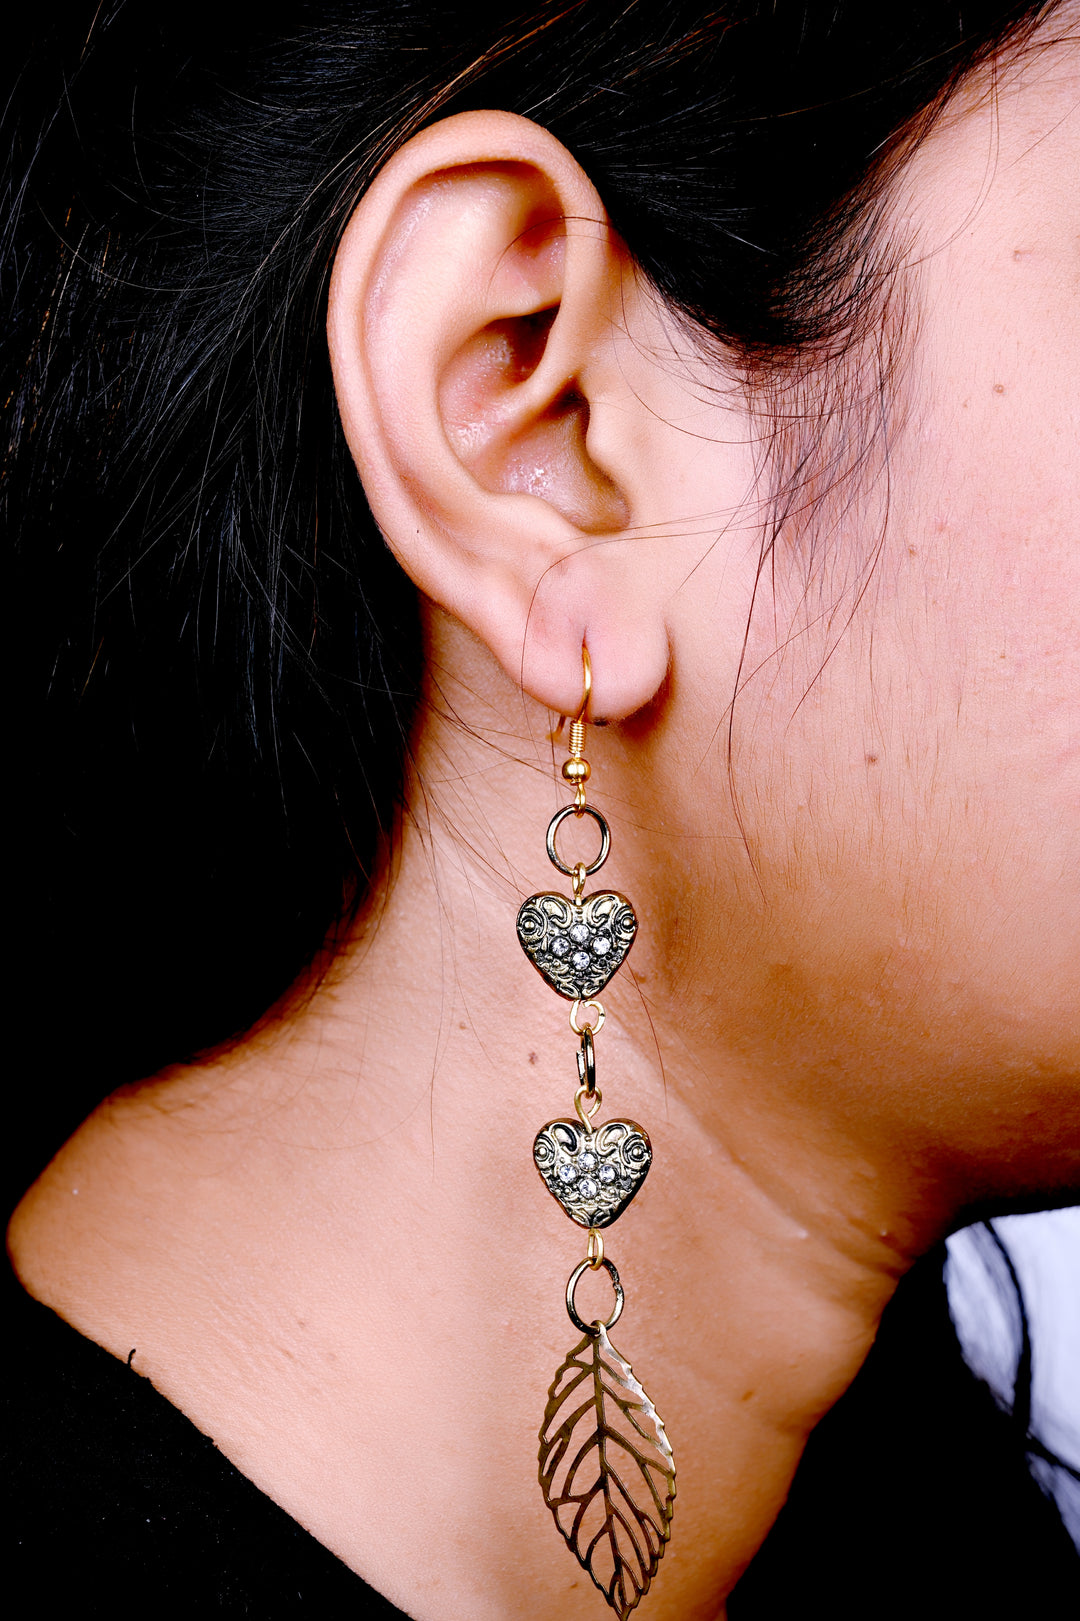 Heart Shaped Metal Charms Earring Styled With Metal Leaf Charms